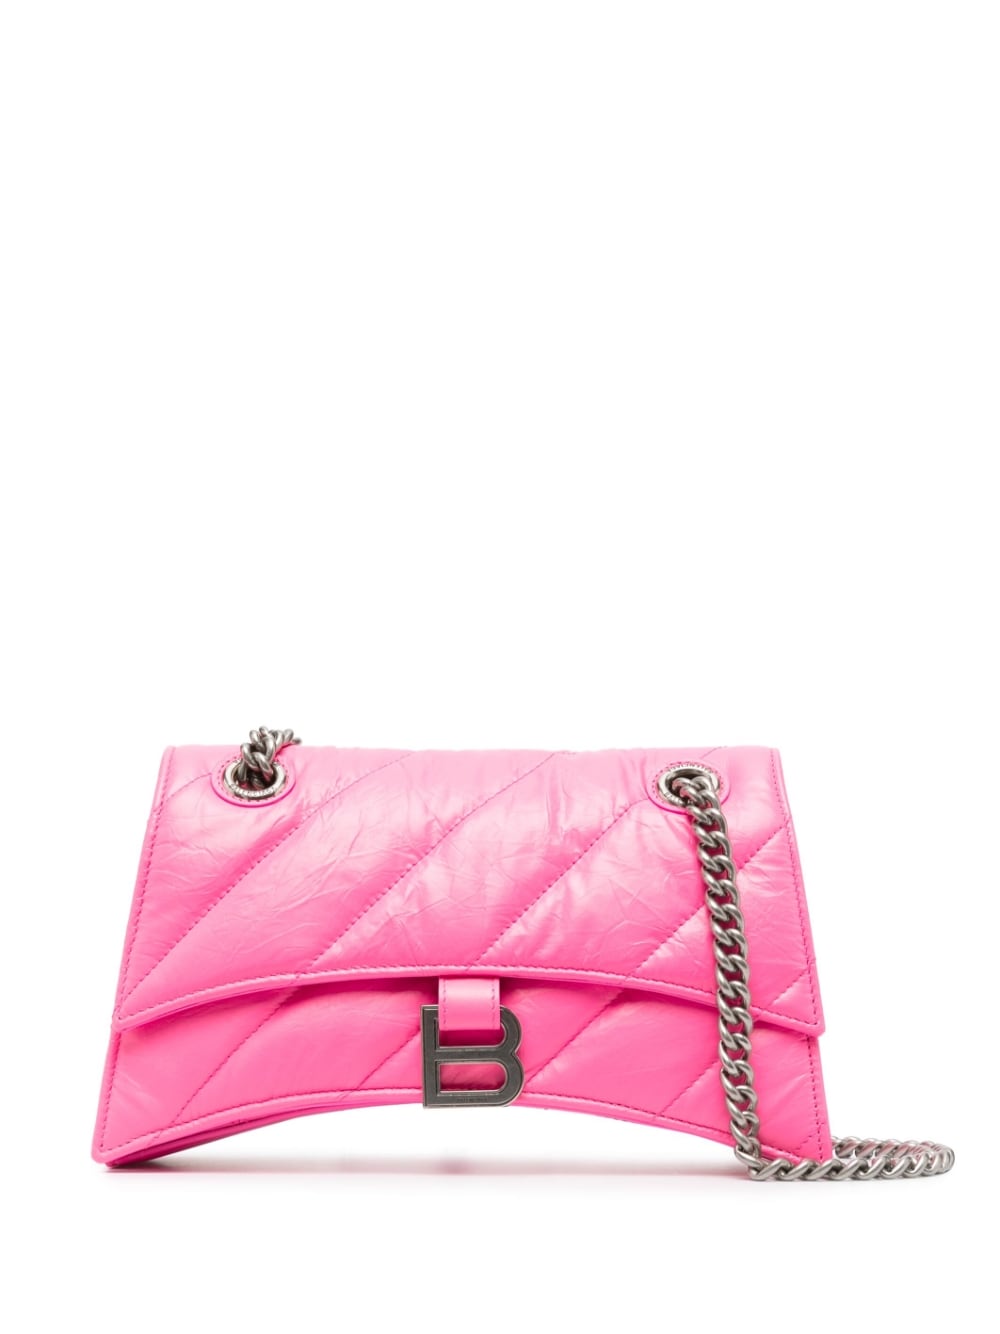 Balenciaga Crush Small Quilted Leather Chain Shoulder Bag